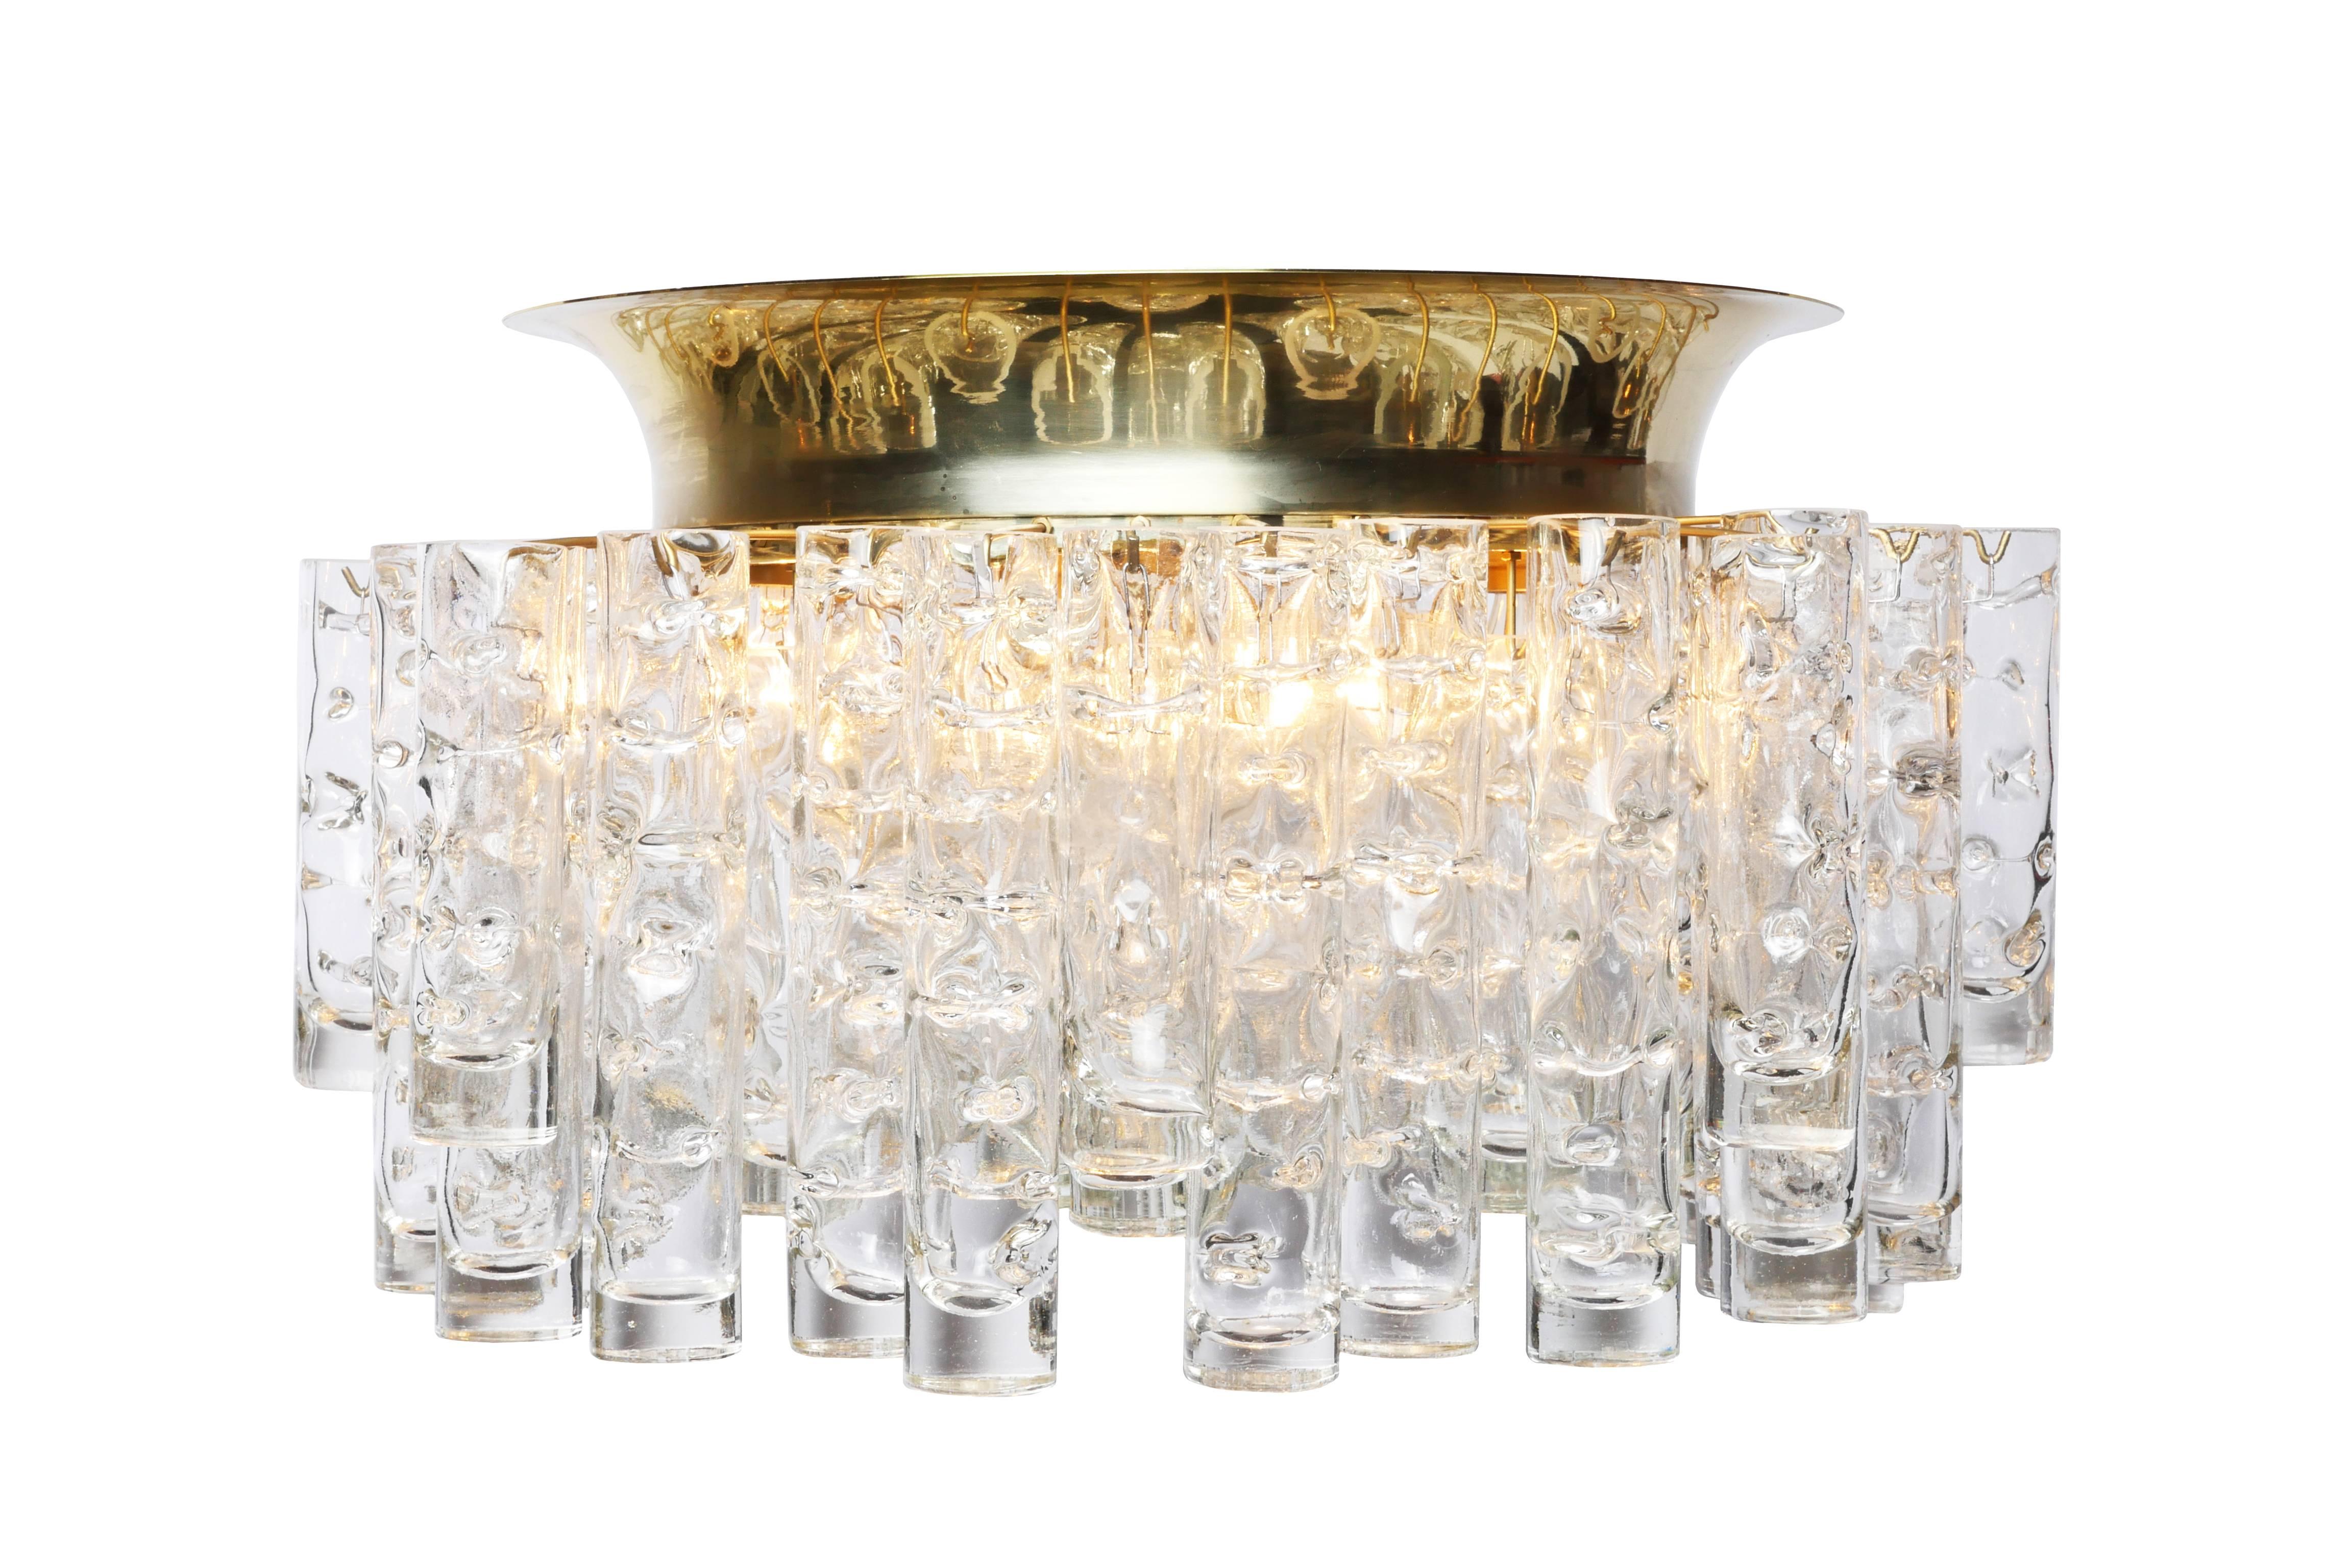 This exceptional German 1950s flush mount was designed by Doria. It features 48 handblown textured glass tubes cascading from a circular brass frame. It is in excellent condition and has been newly rewired.